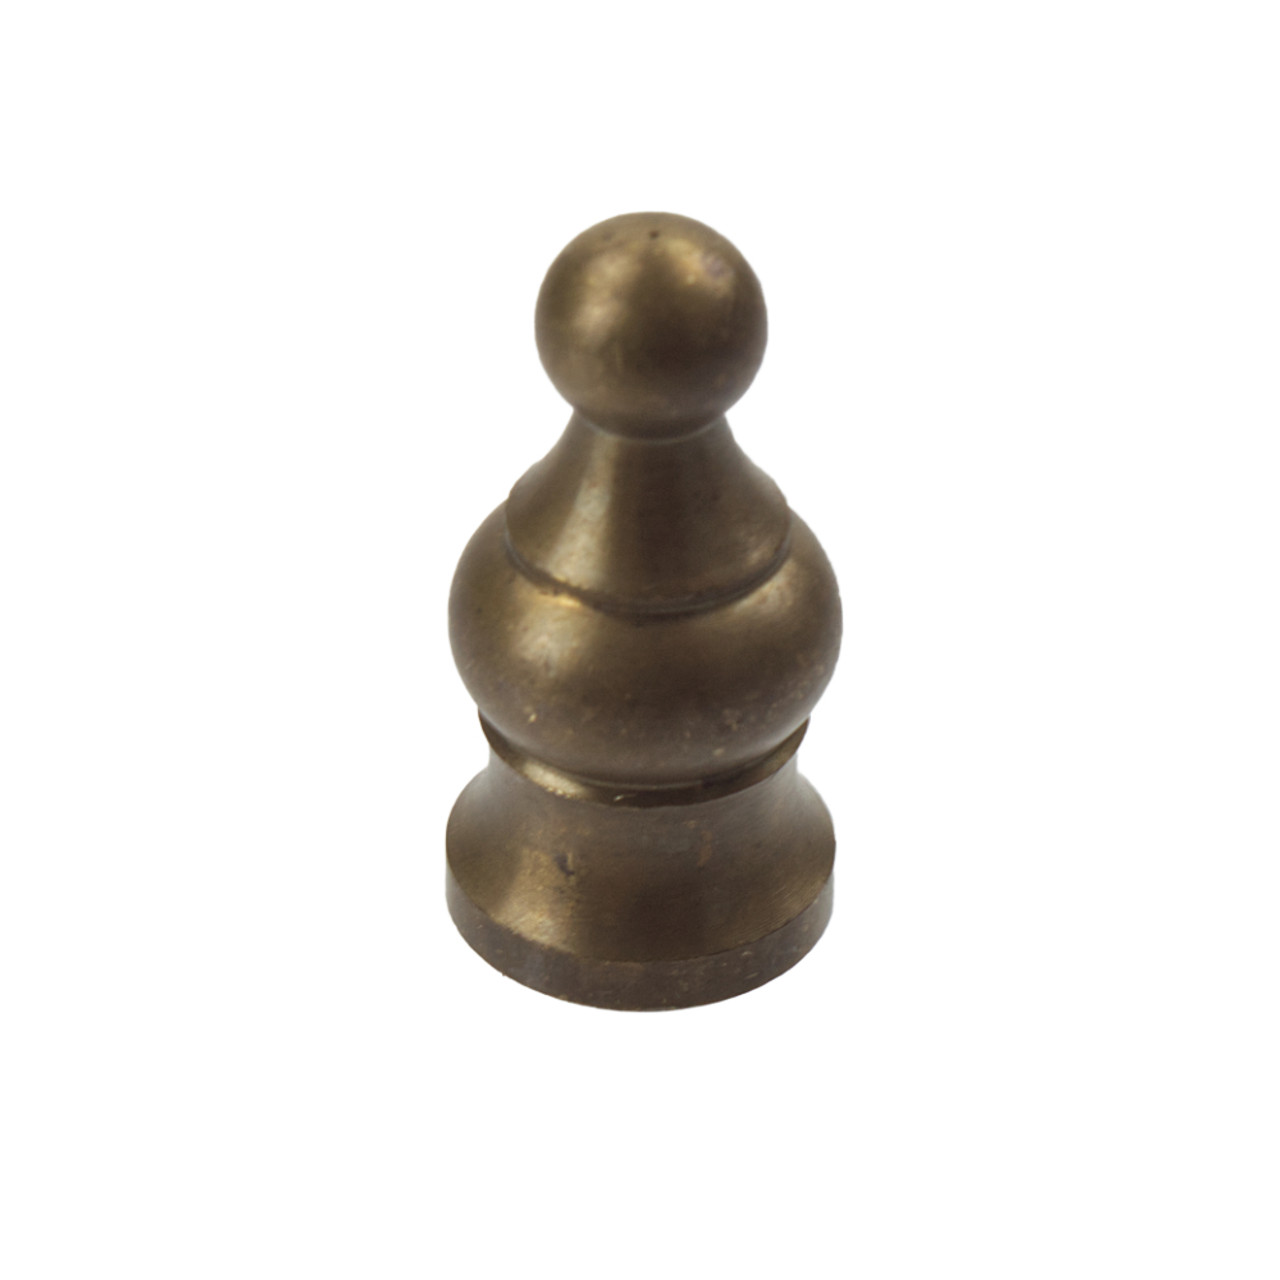 Old English Long Regency Finial with 10mm Thread